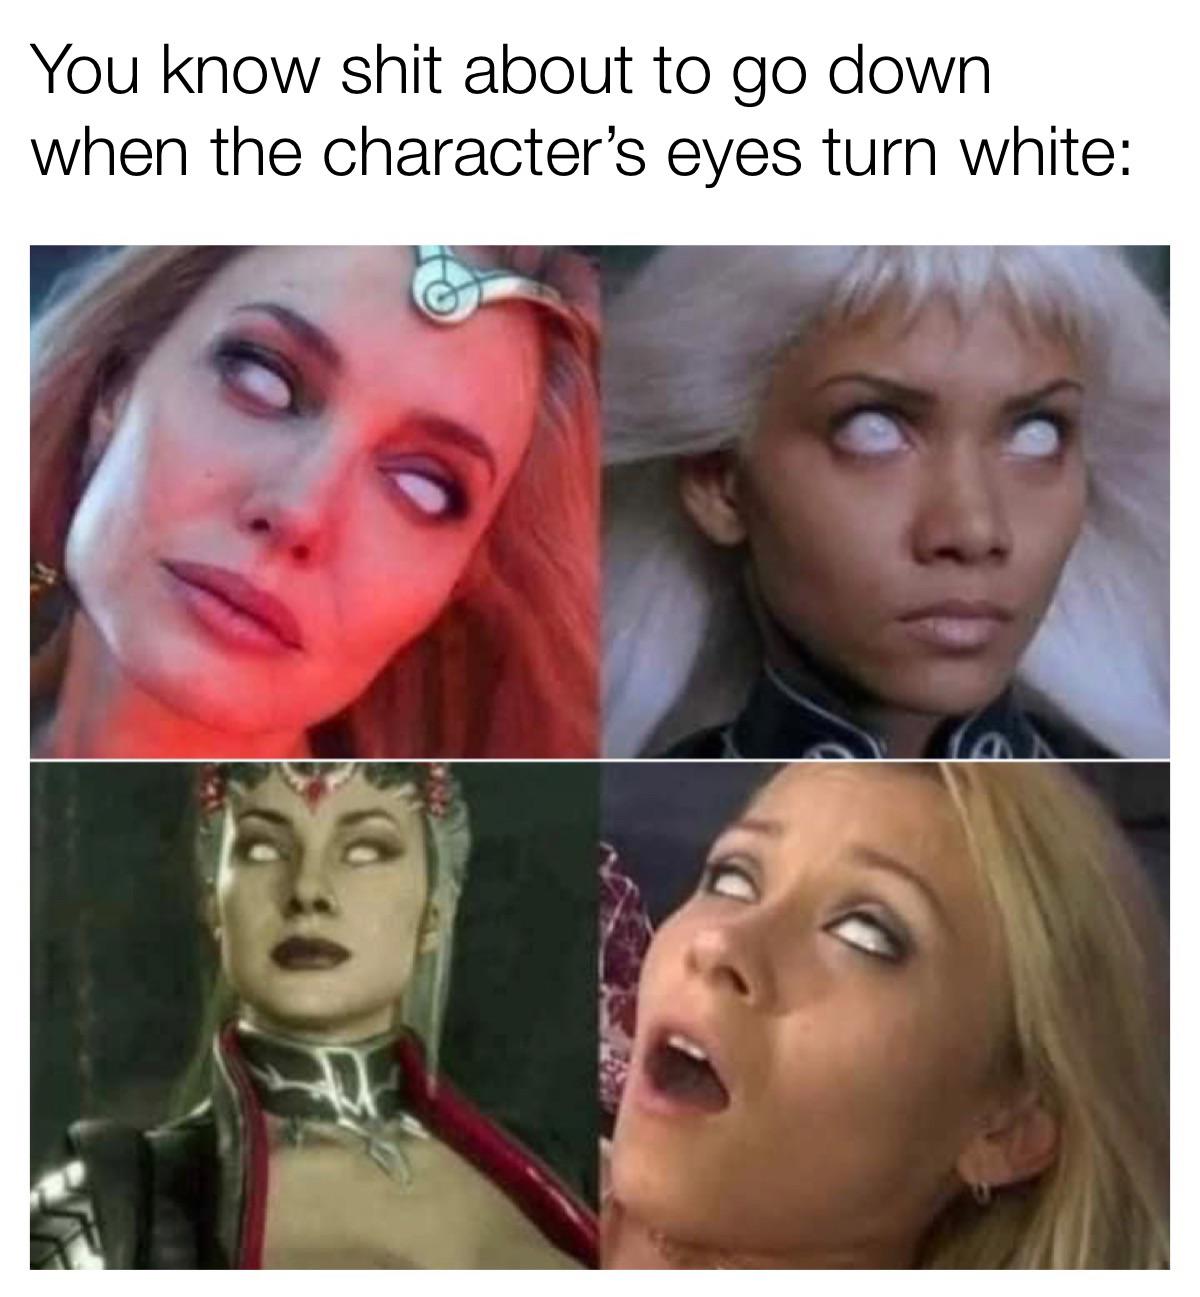 funny gaming memes - characters in another level when they have white eyes - You know shit about to go down when the character's eyes turn white